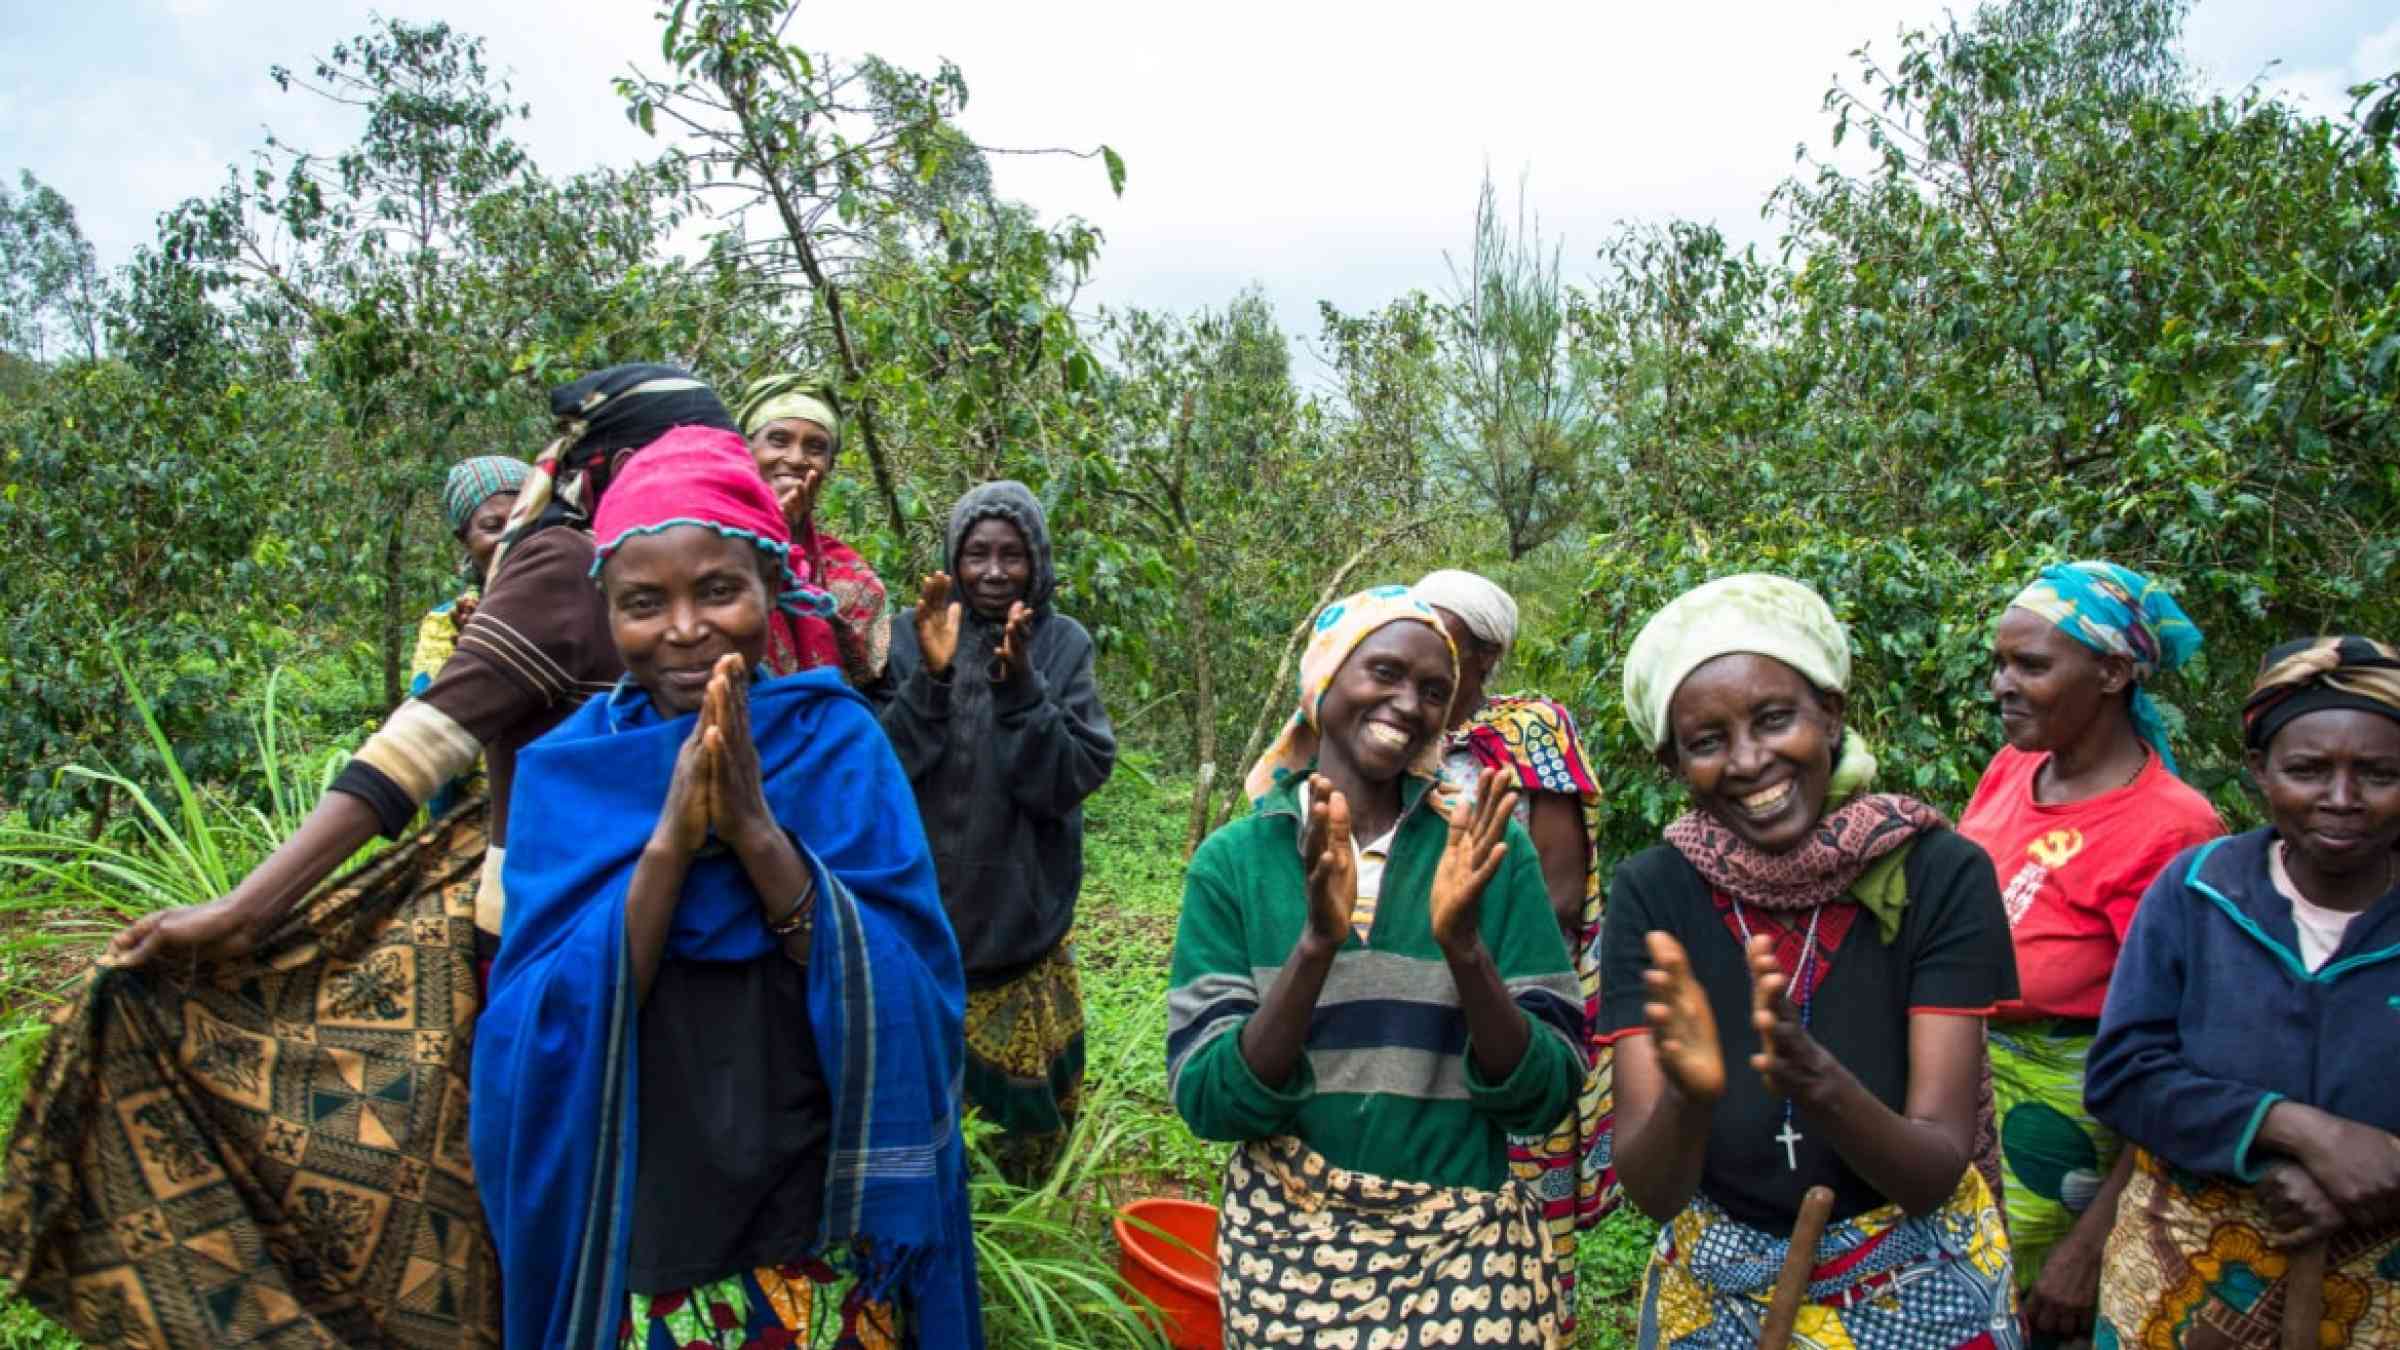 Women in Rwanda growing coffee to support themselves.